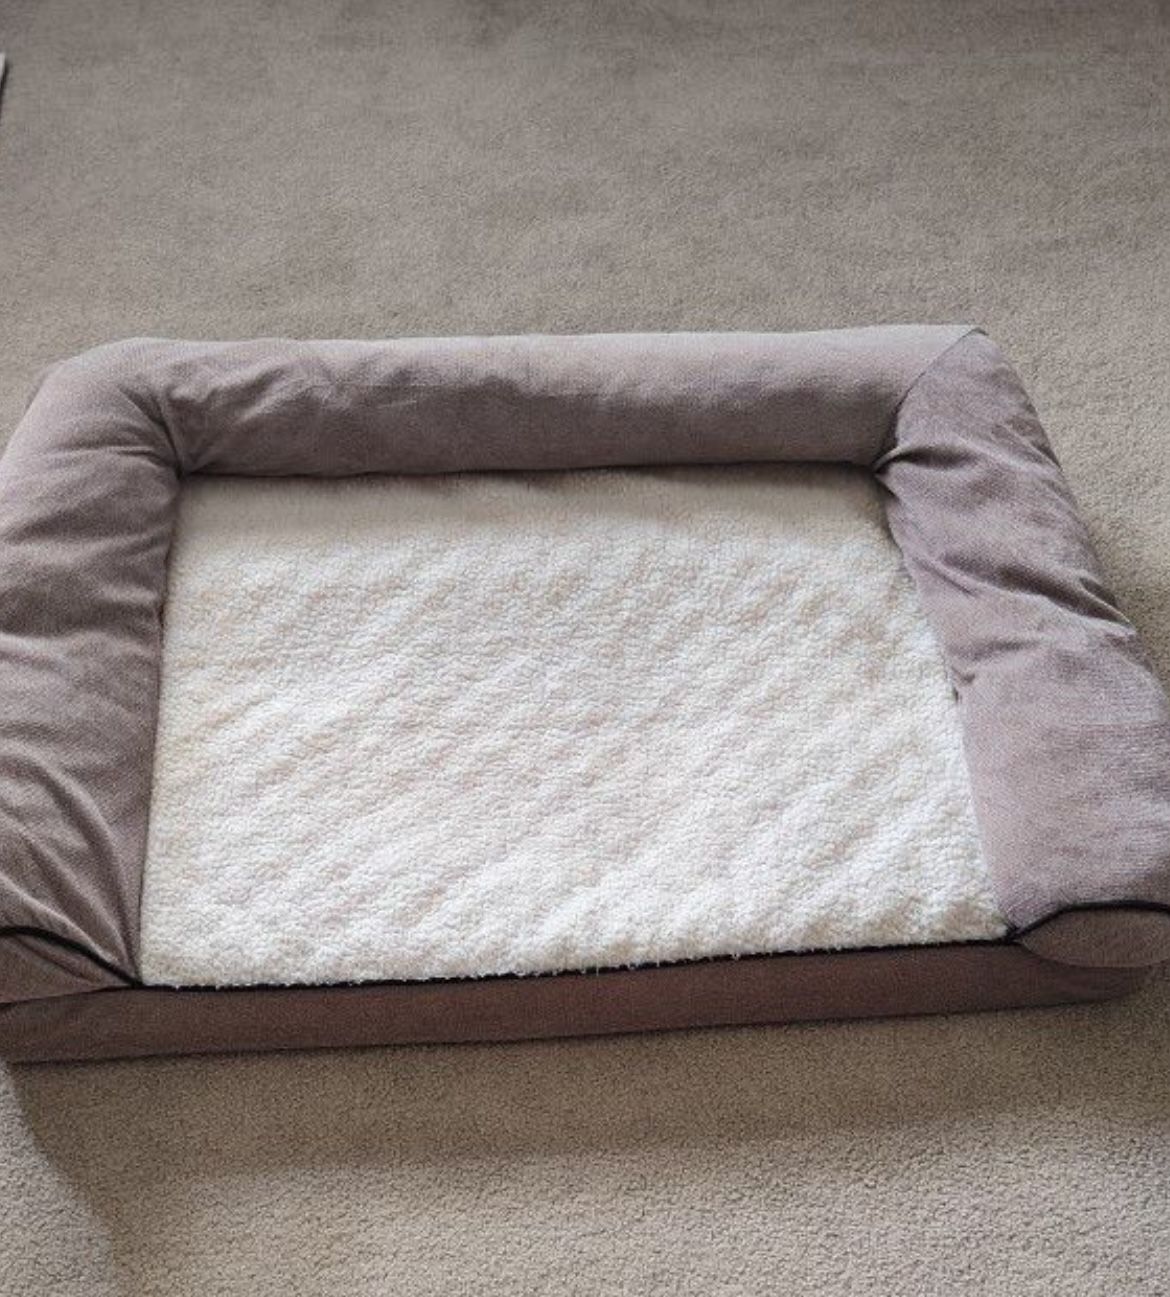 Big Dog Bed, Pet Couch, Soft & Great Condition